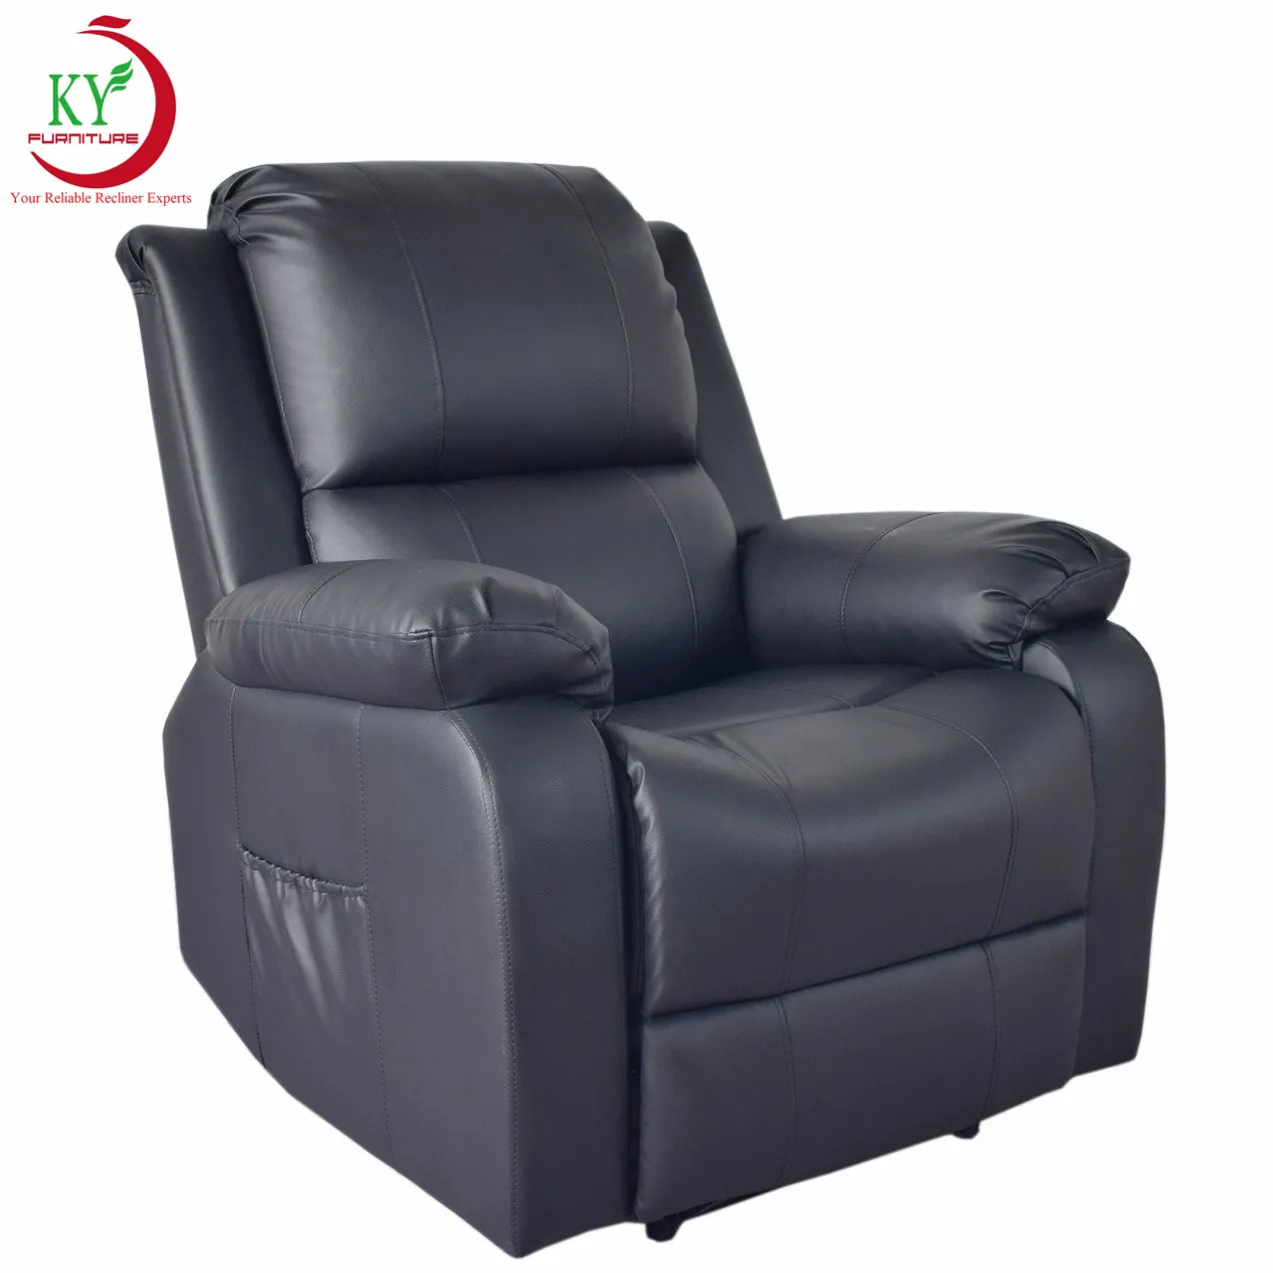 

JKY Furniture Manual Recliner Chair Modern Leather Electric Recliner Sofa Set China Living Room Leather Chesterfield Sofa Black